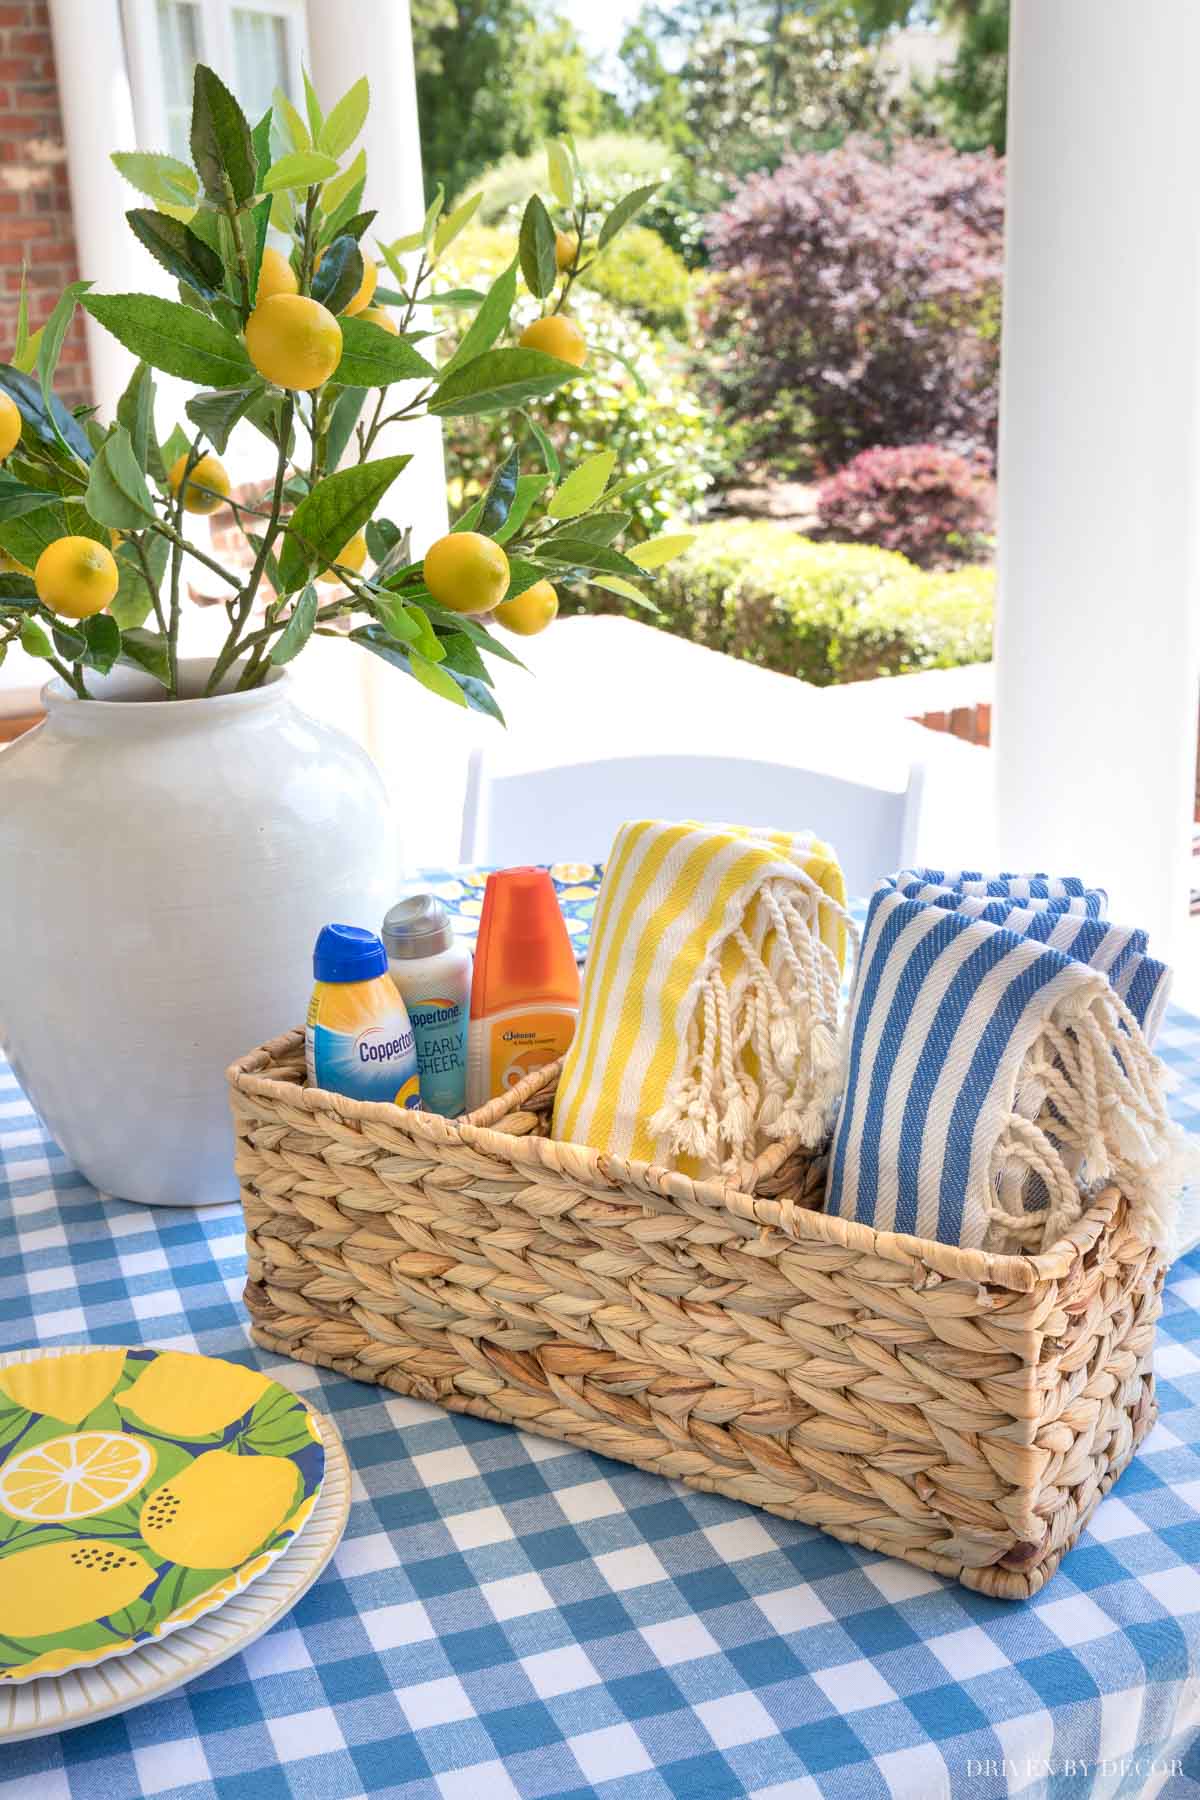 This woven basket holds outdoor essentials like sunscreen, bug spray, and Turkish towels for when it gets chilly!